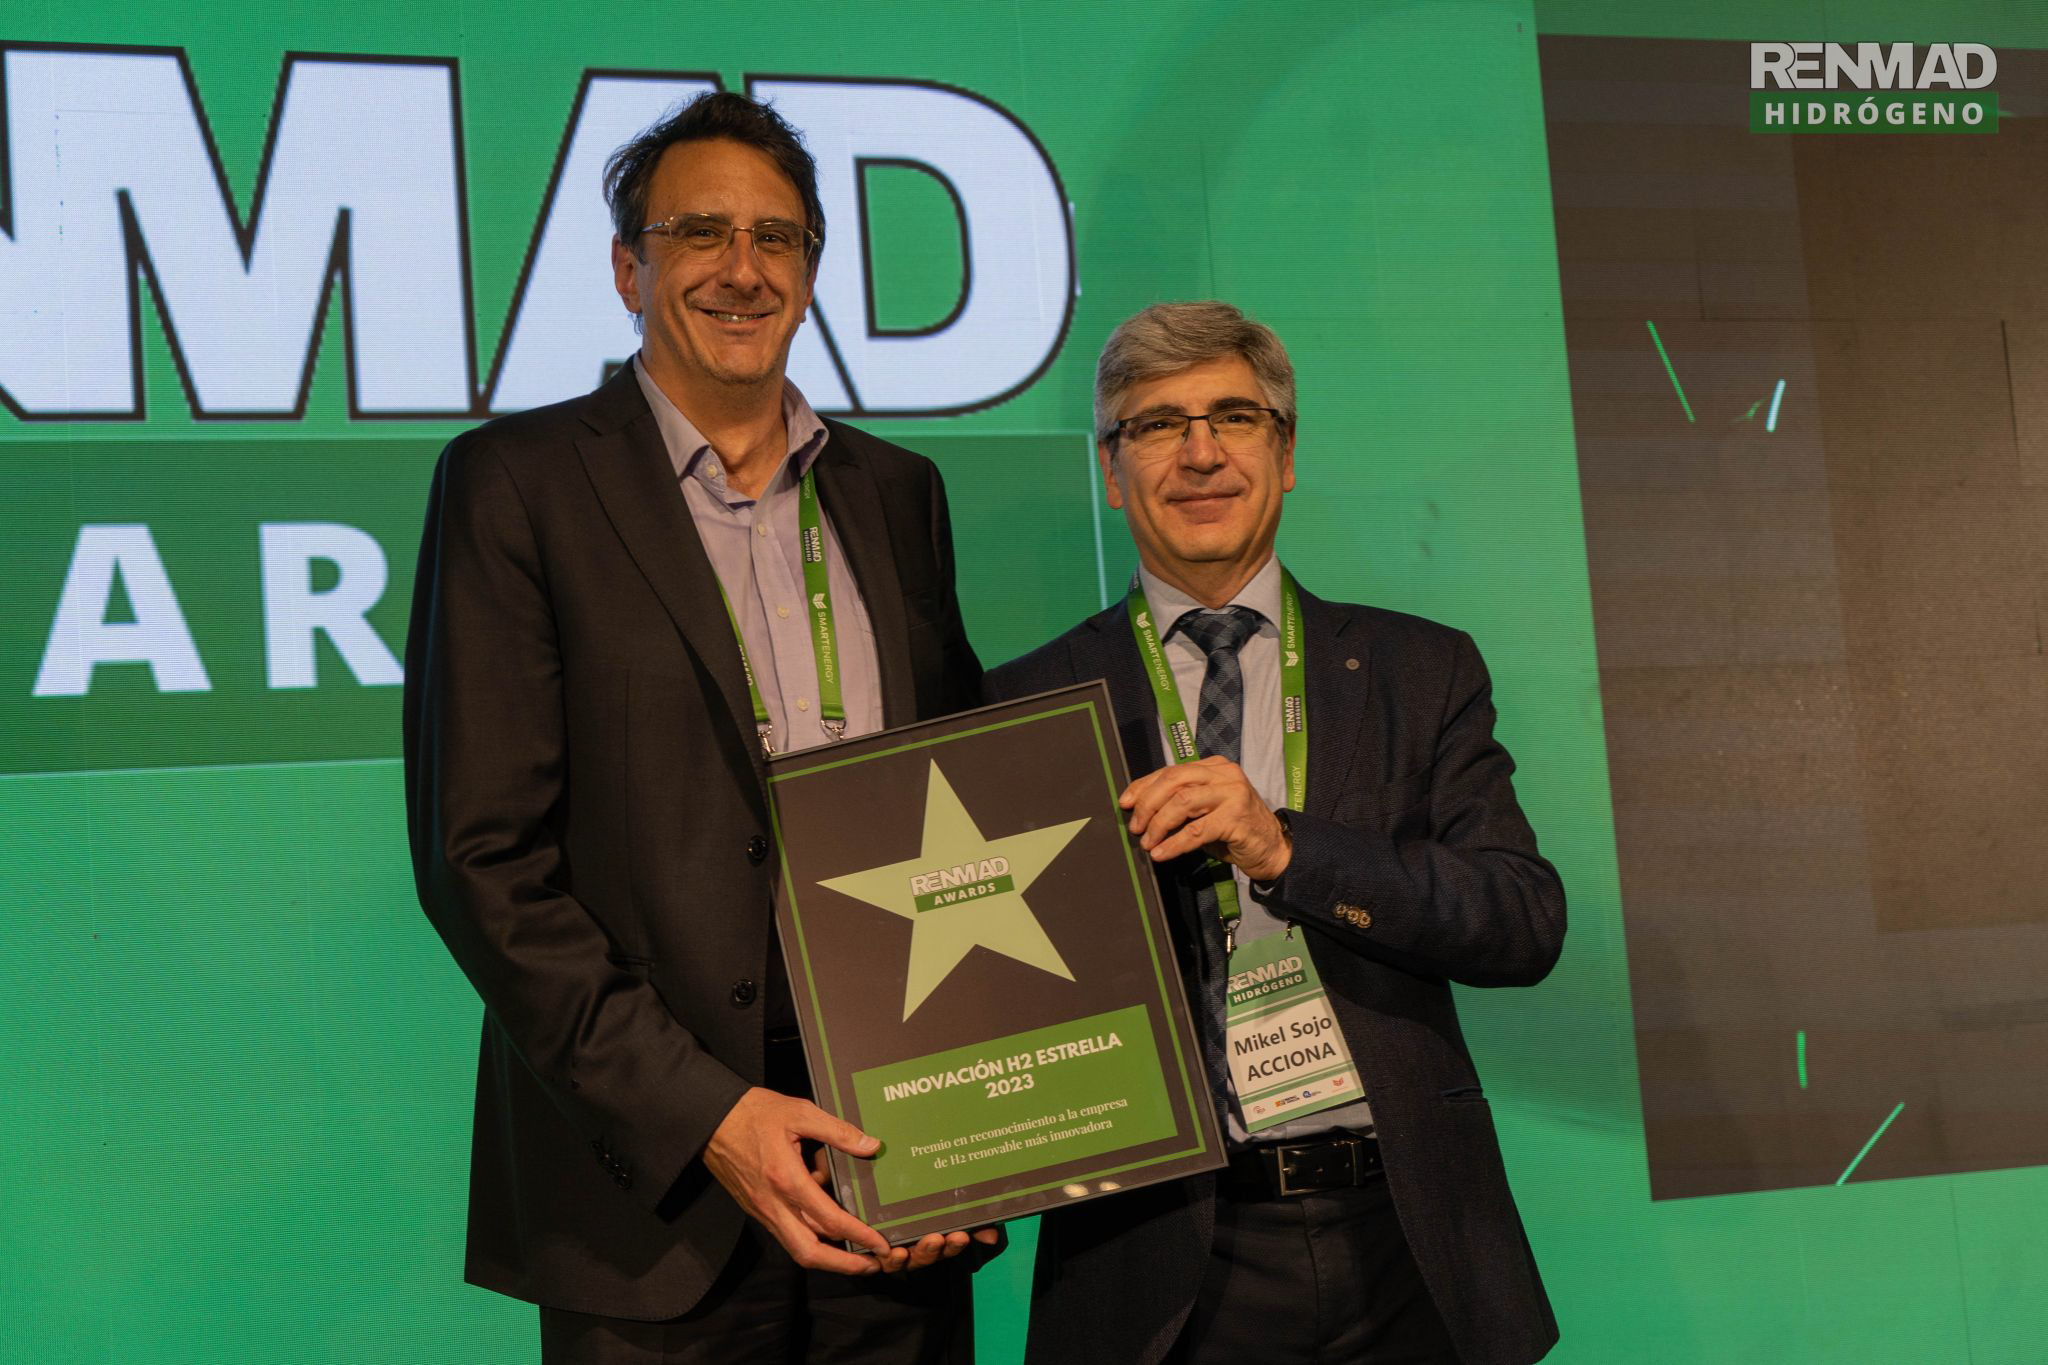 Green Hysland wins two Prizes at the RENMAD Awards